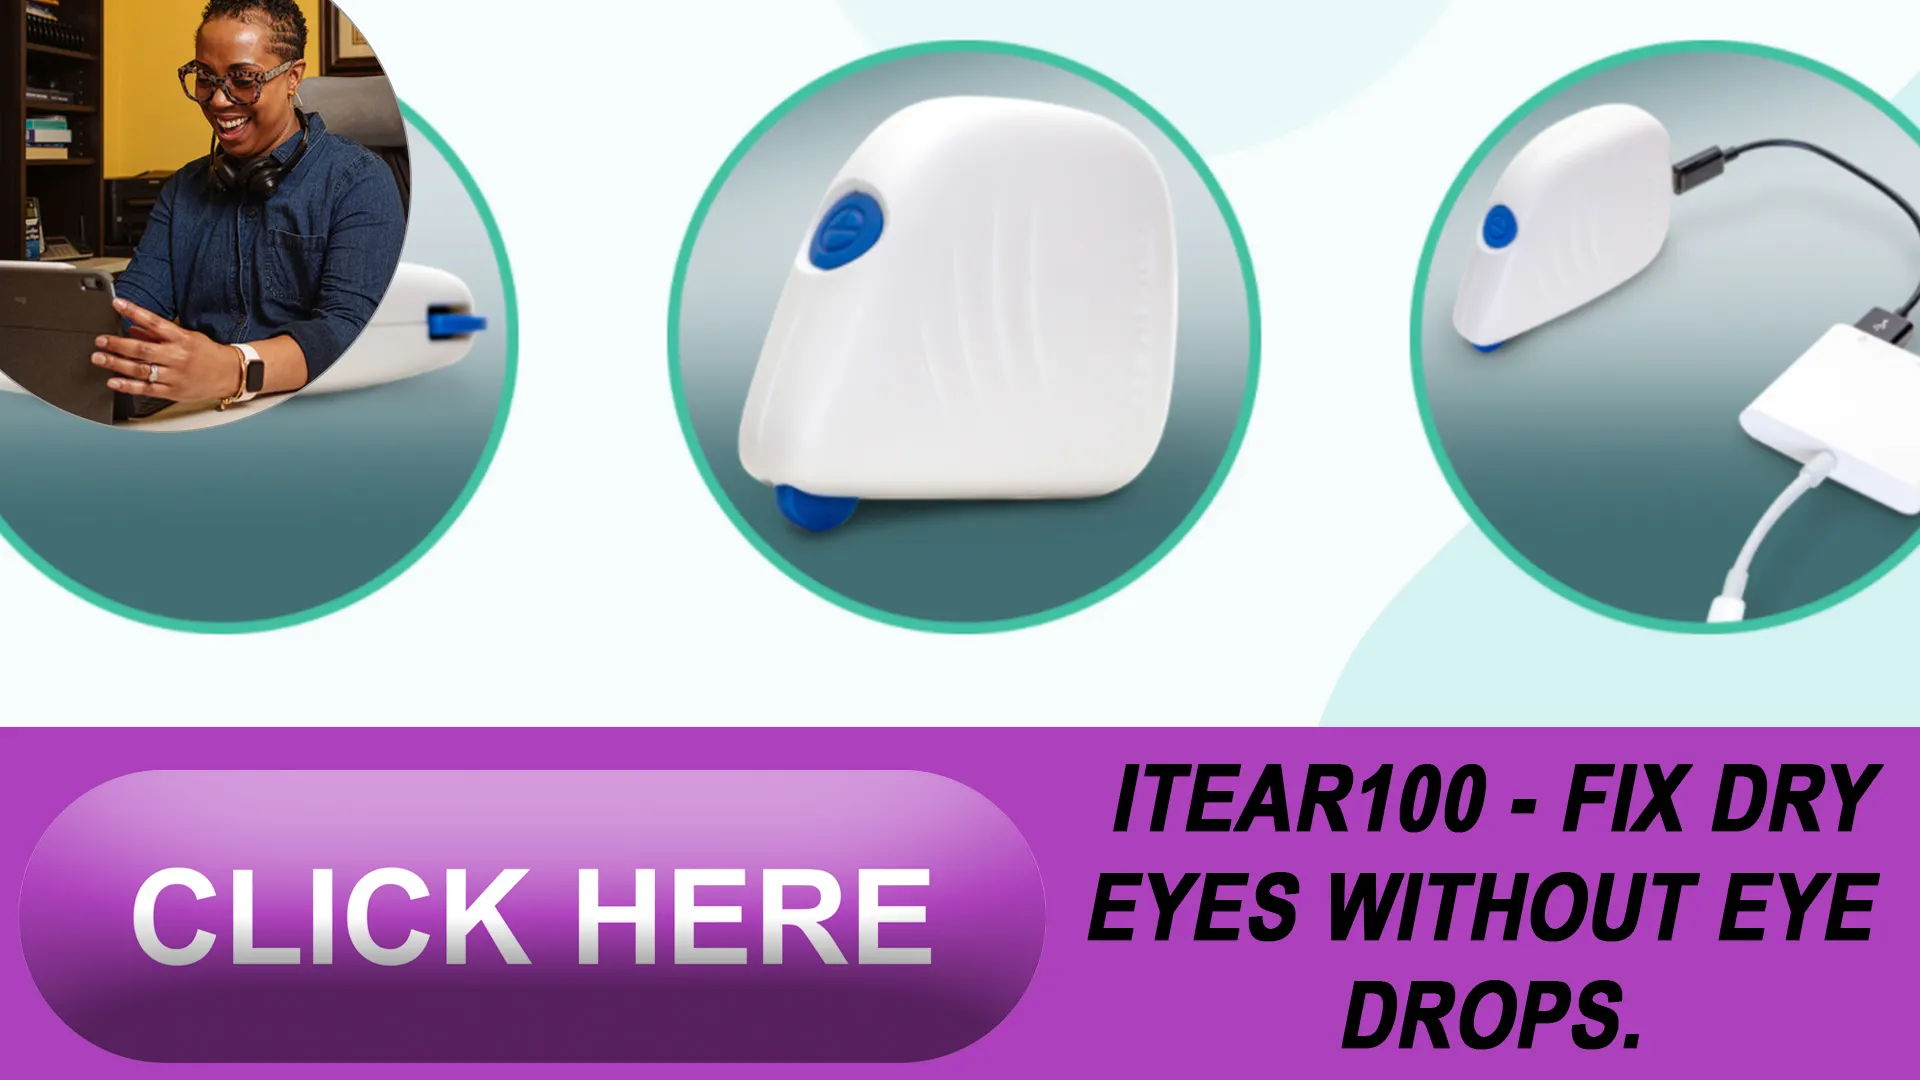 Join the Community of iTEAR100 Advocates